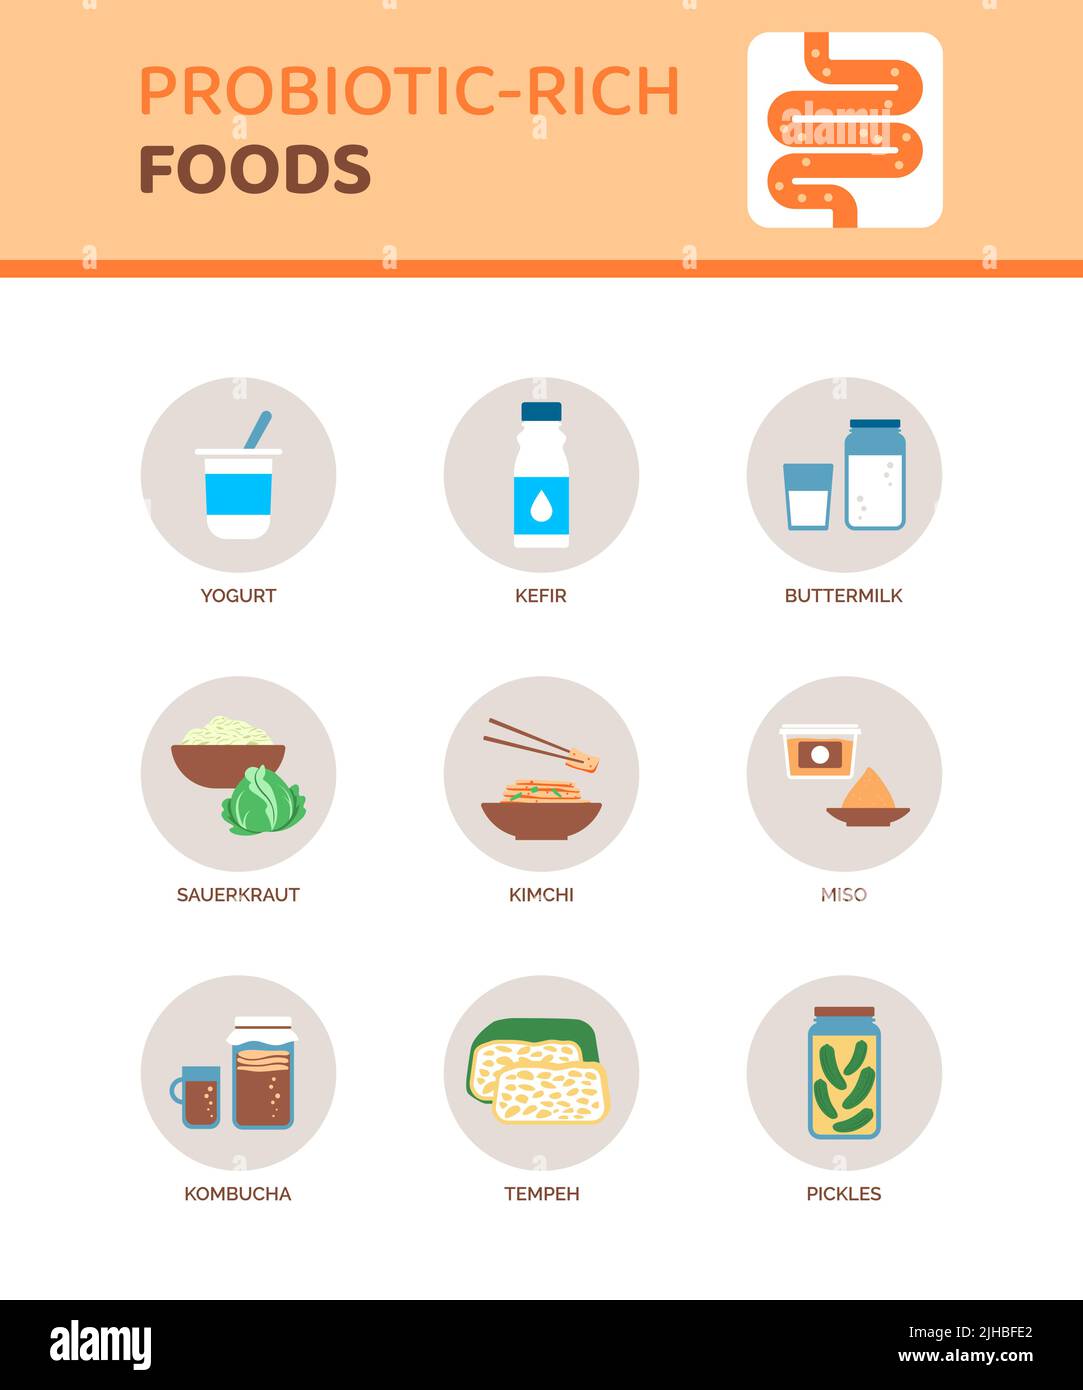 Probiotic-rich food for better digestive health, infographic with icons Stock Vector